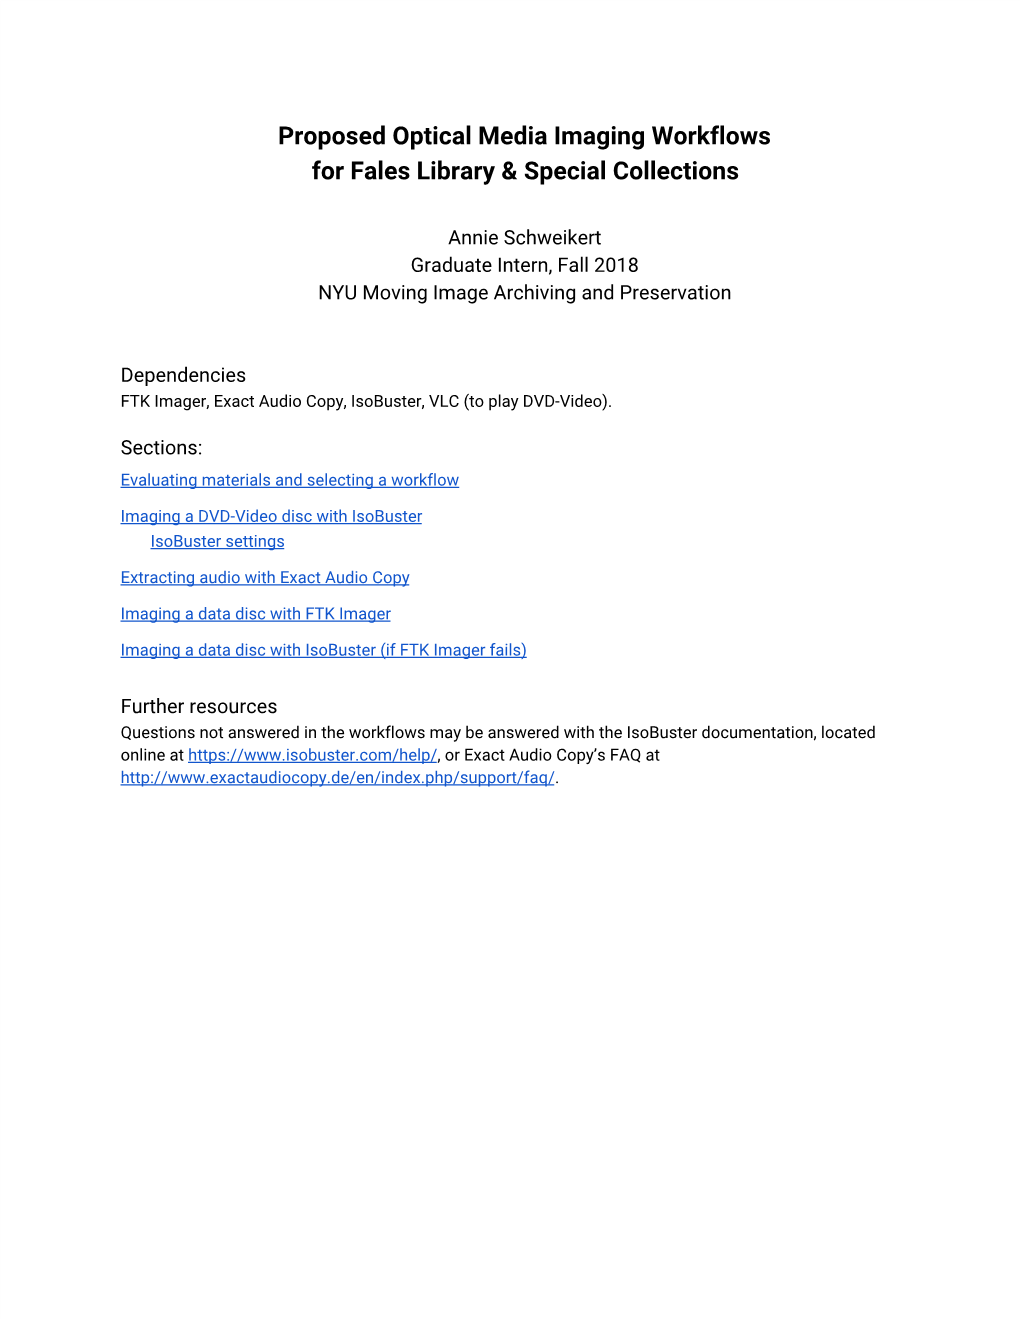 Proposed Optical Media Imaging Workflows for Fales Library & Special Collections